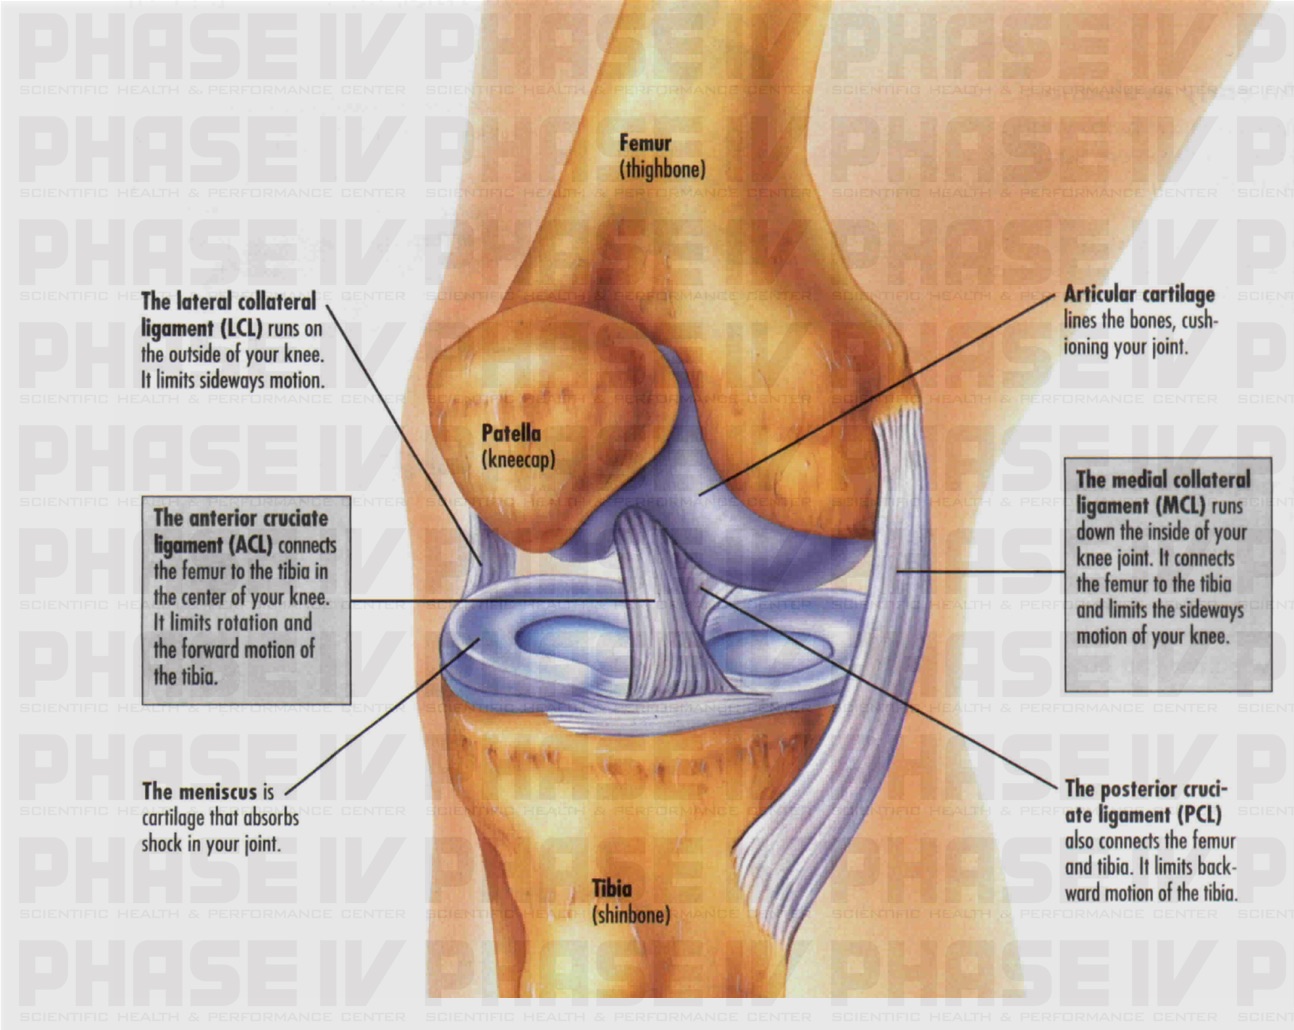 The iliotibial band and site of injury at lateral epicondyle of